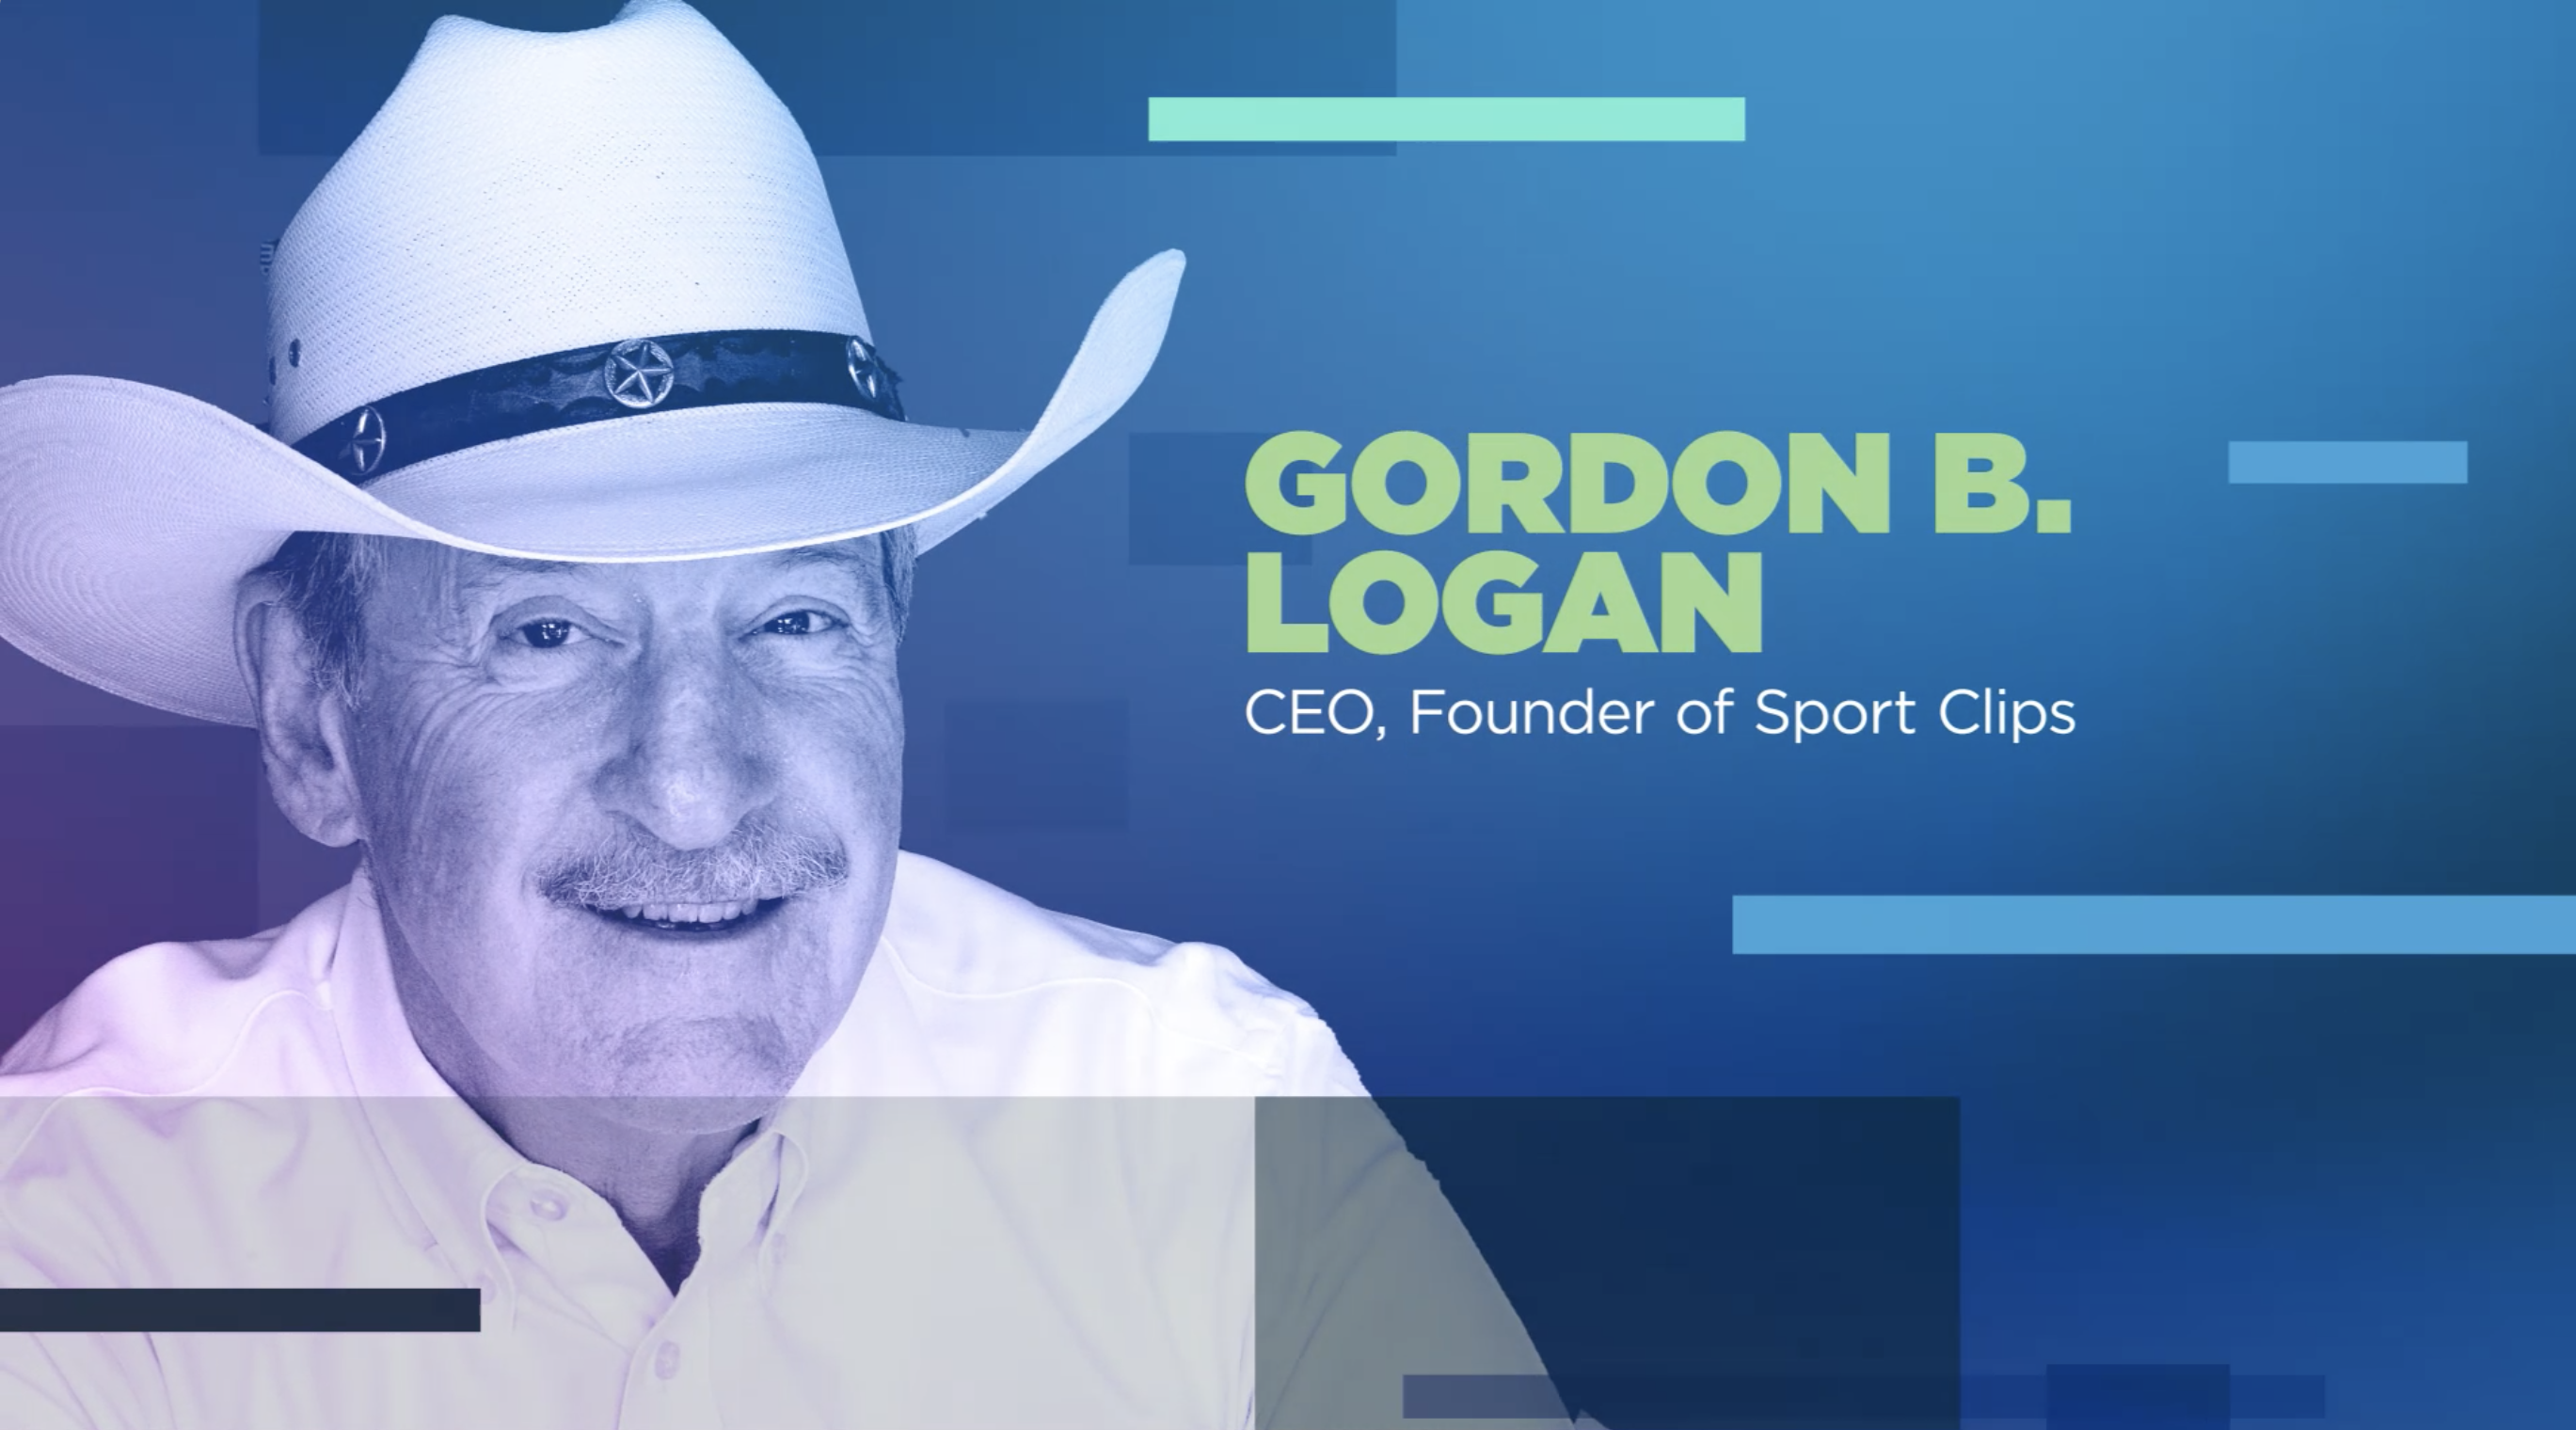 Gordan Logan CEO and Founder of Sport Clips